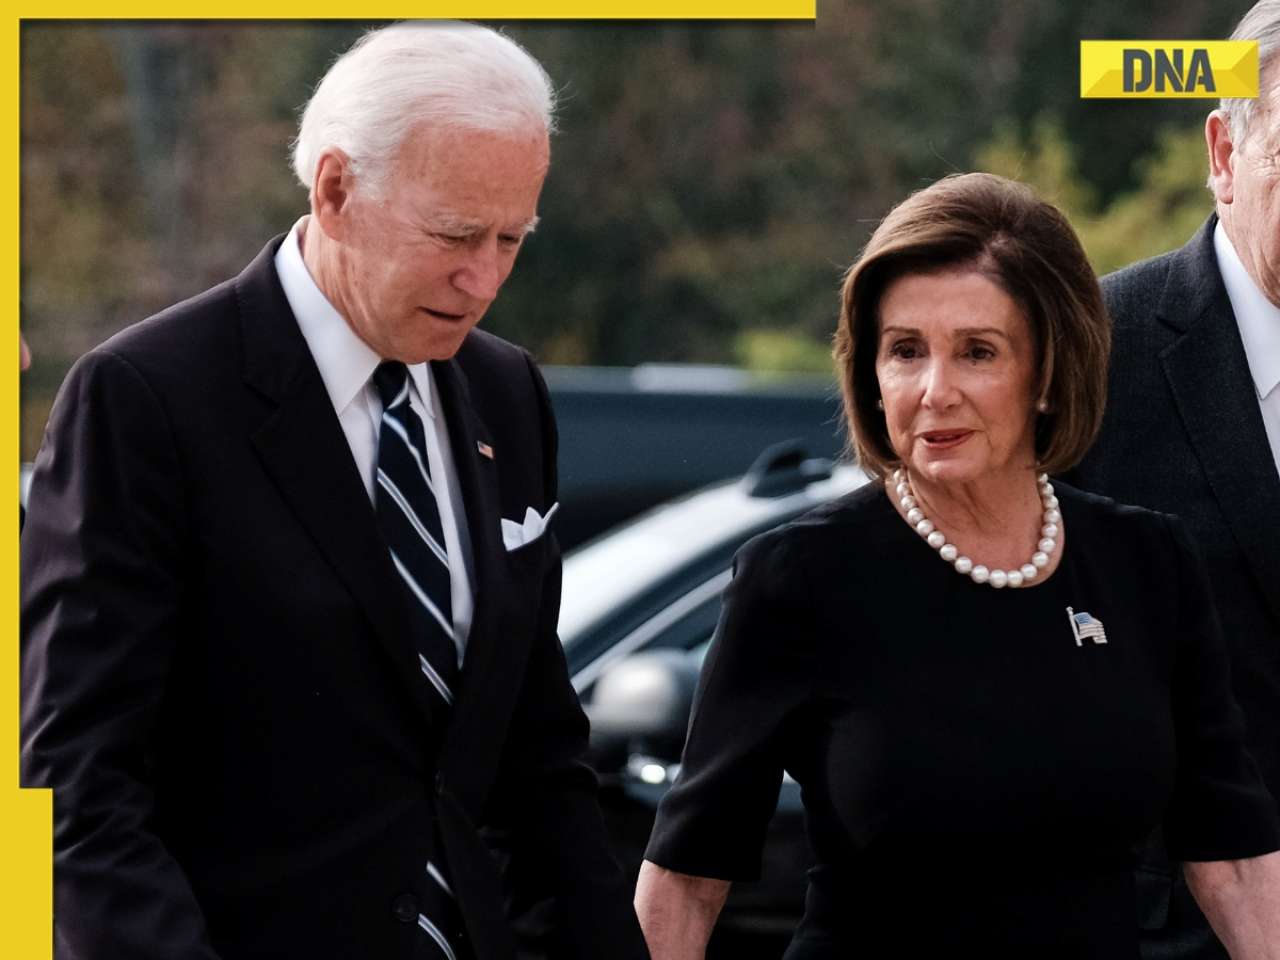 Israel-Gaza war: Nancy Pelosi joins call for President Biden to stop transfer of US weapons